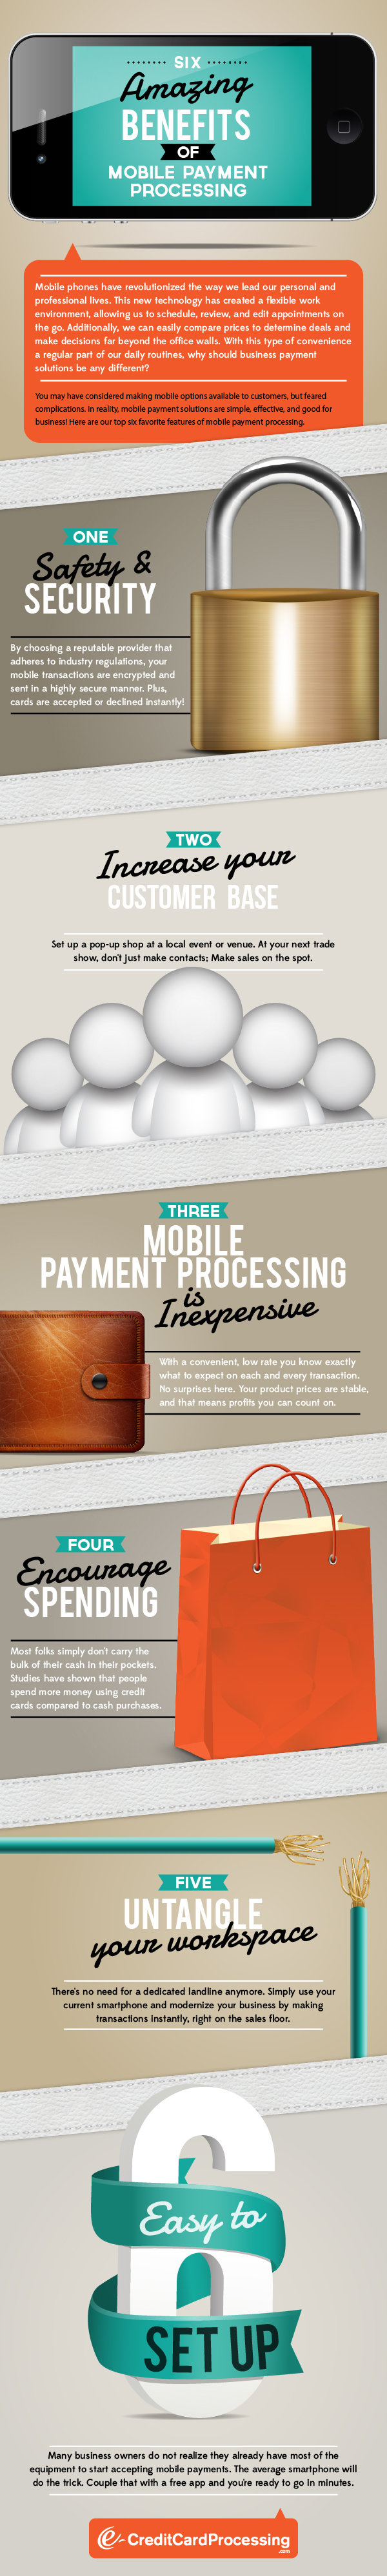 Six Amazing Benefits of Mobile Payment Processing